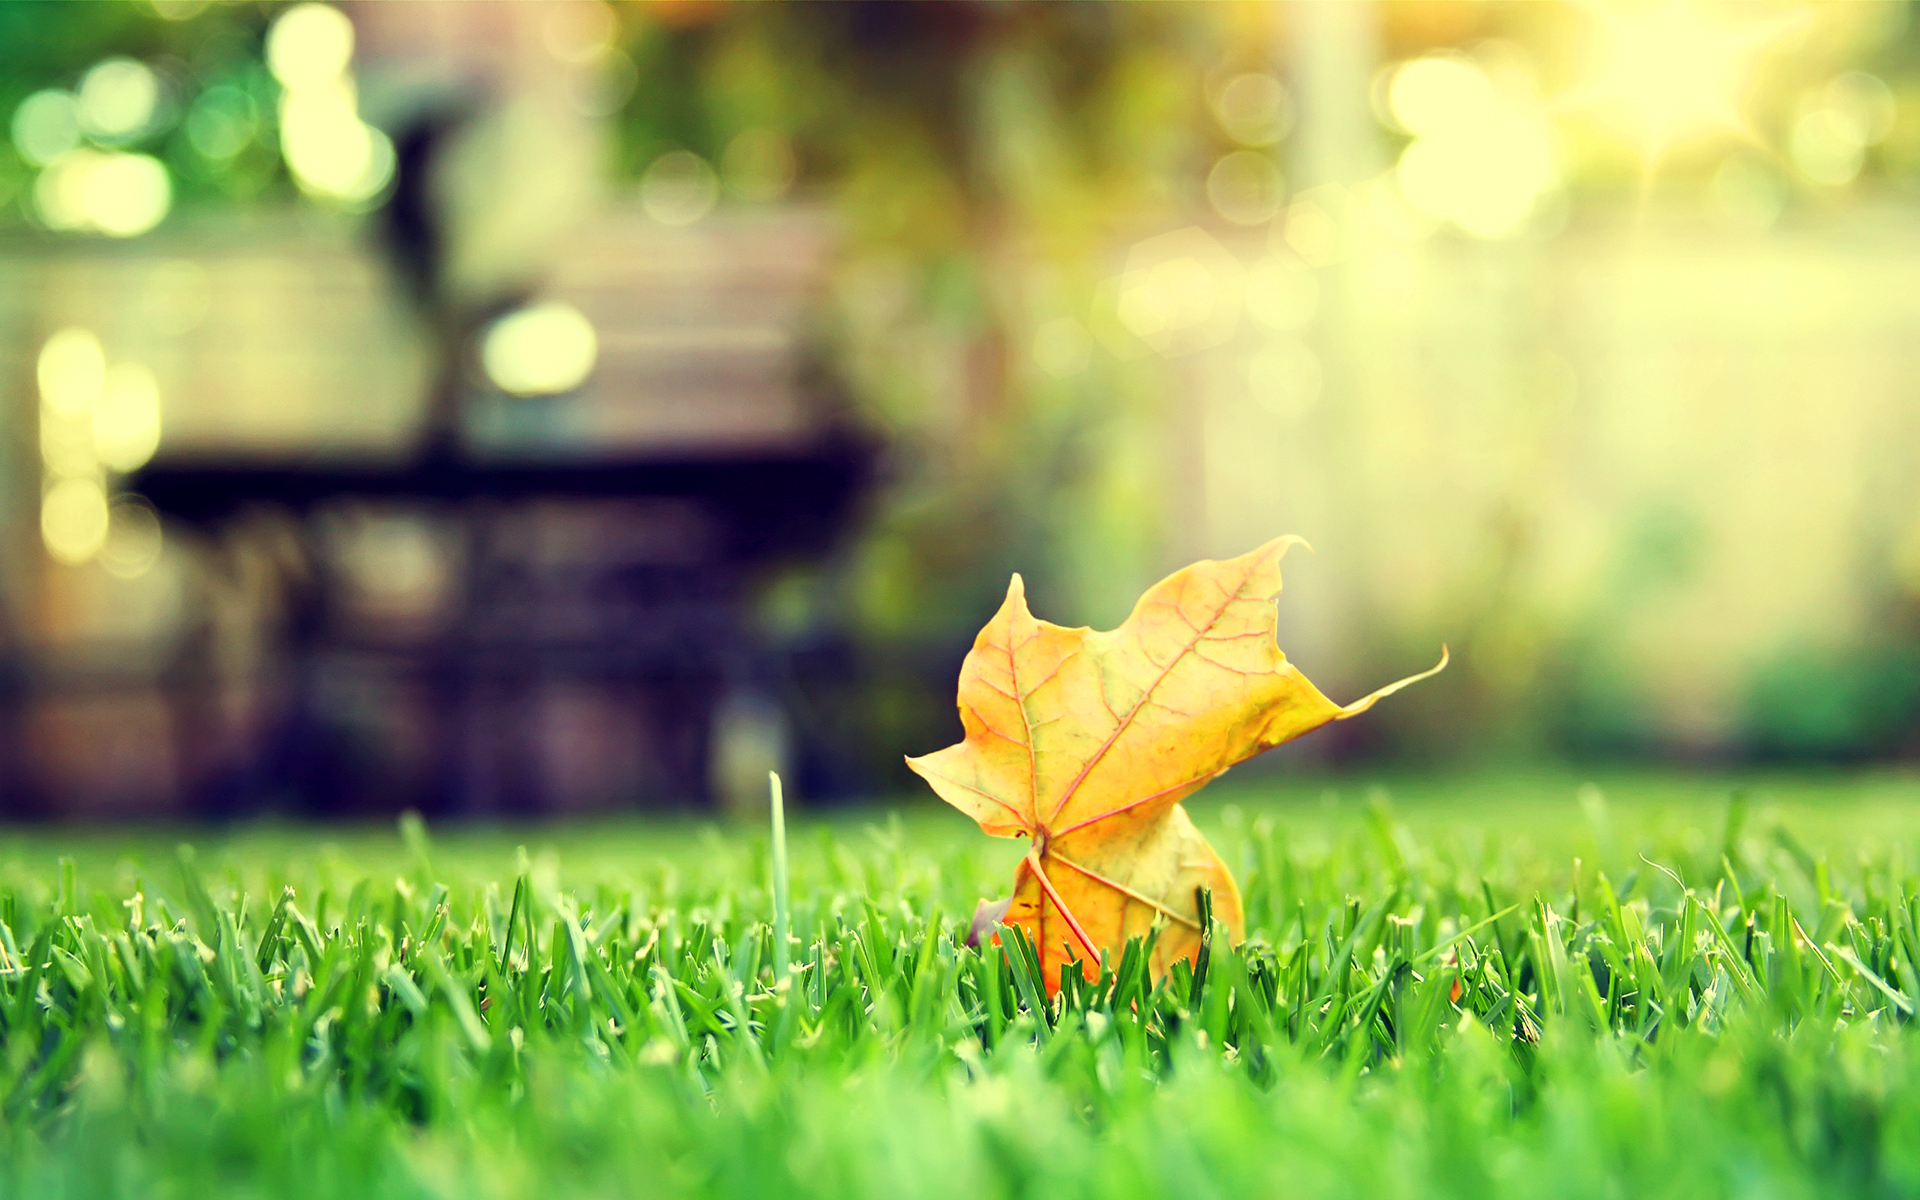 leaf live wallpaper,leaf,people in nature,nature,green,grass